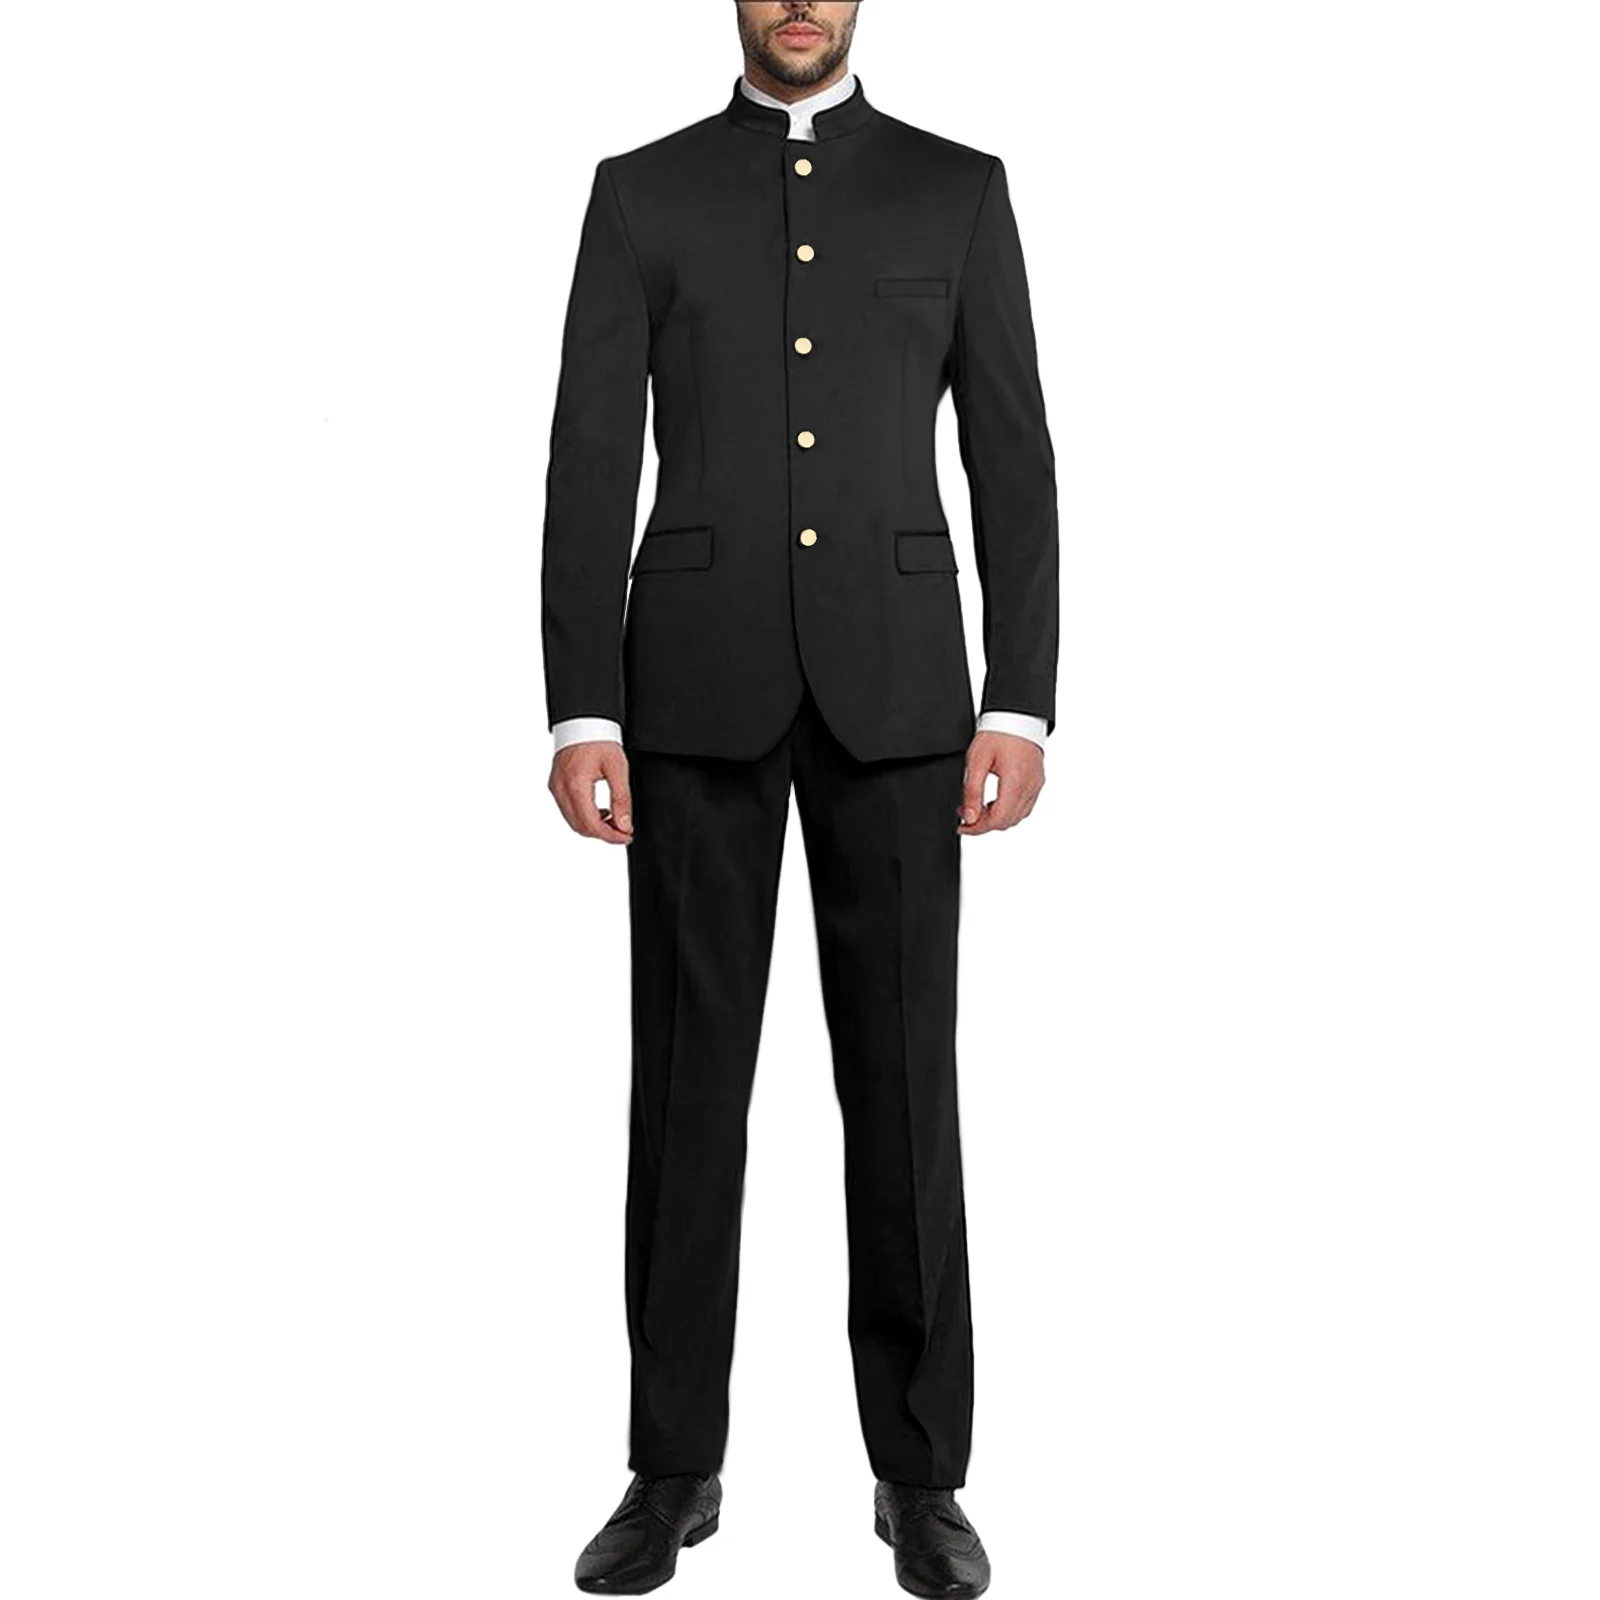 Potentiel Max Men's Long Sleeve Suits, Perfect for Vacation, Going Out, Party, School, Summer Spring Daily wear or Vacation